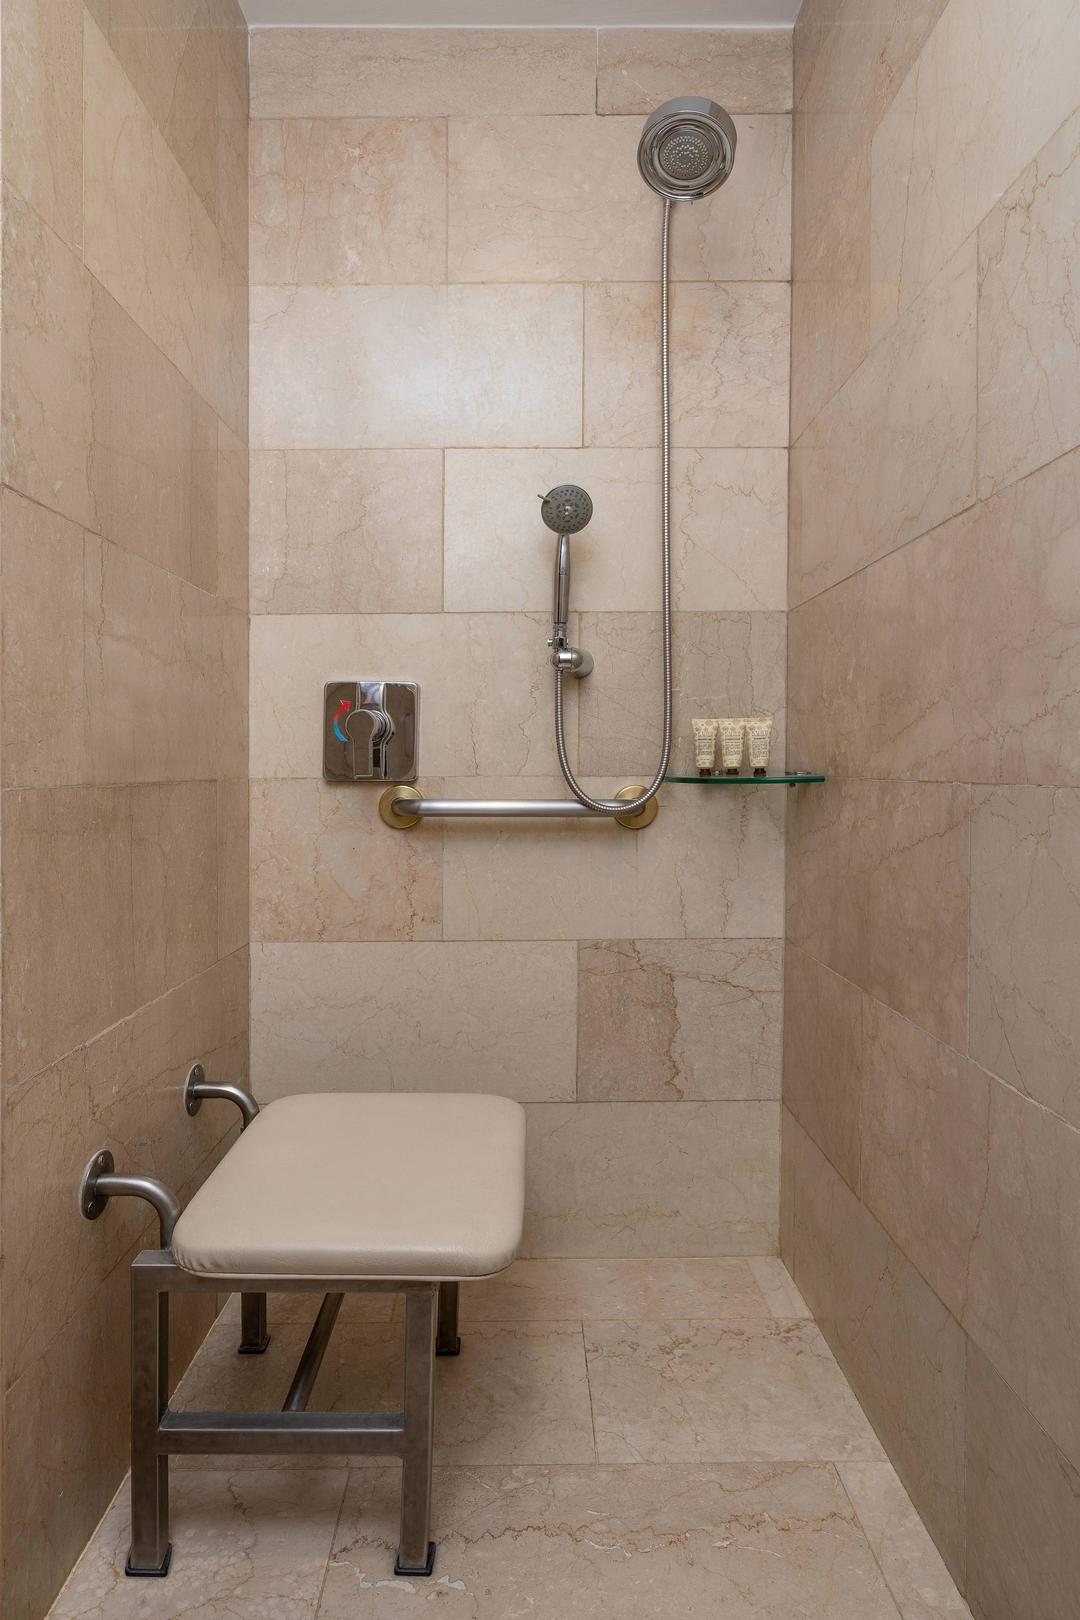 Accessible guest rooms feature showers with bench seats.